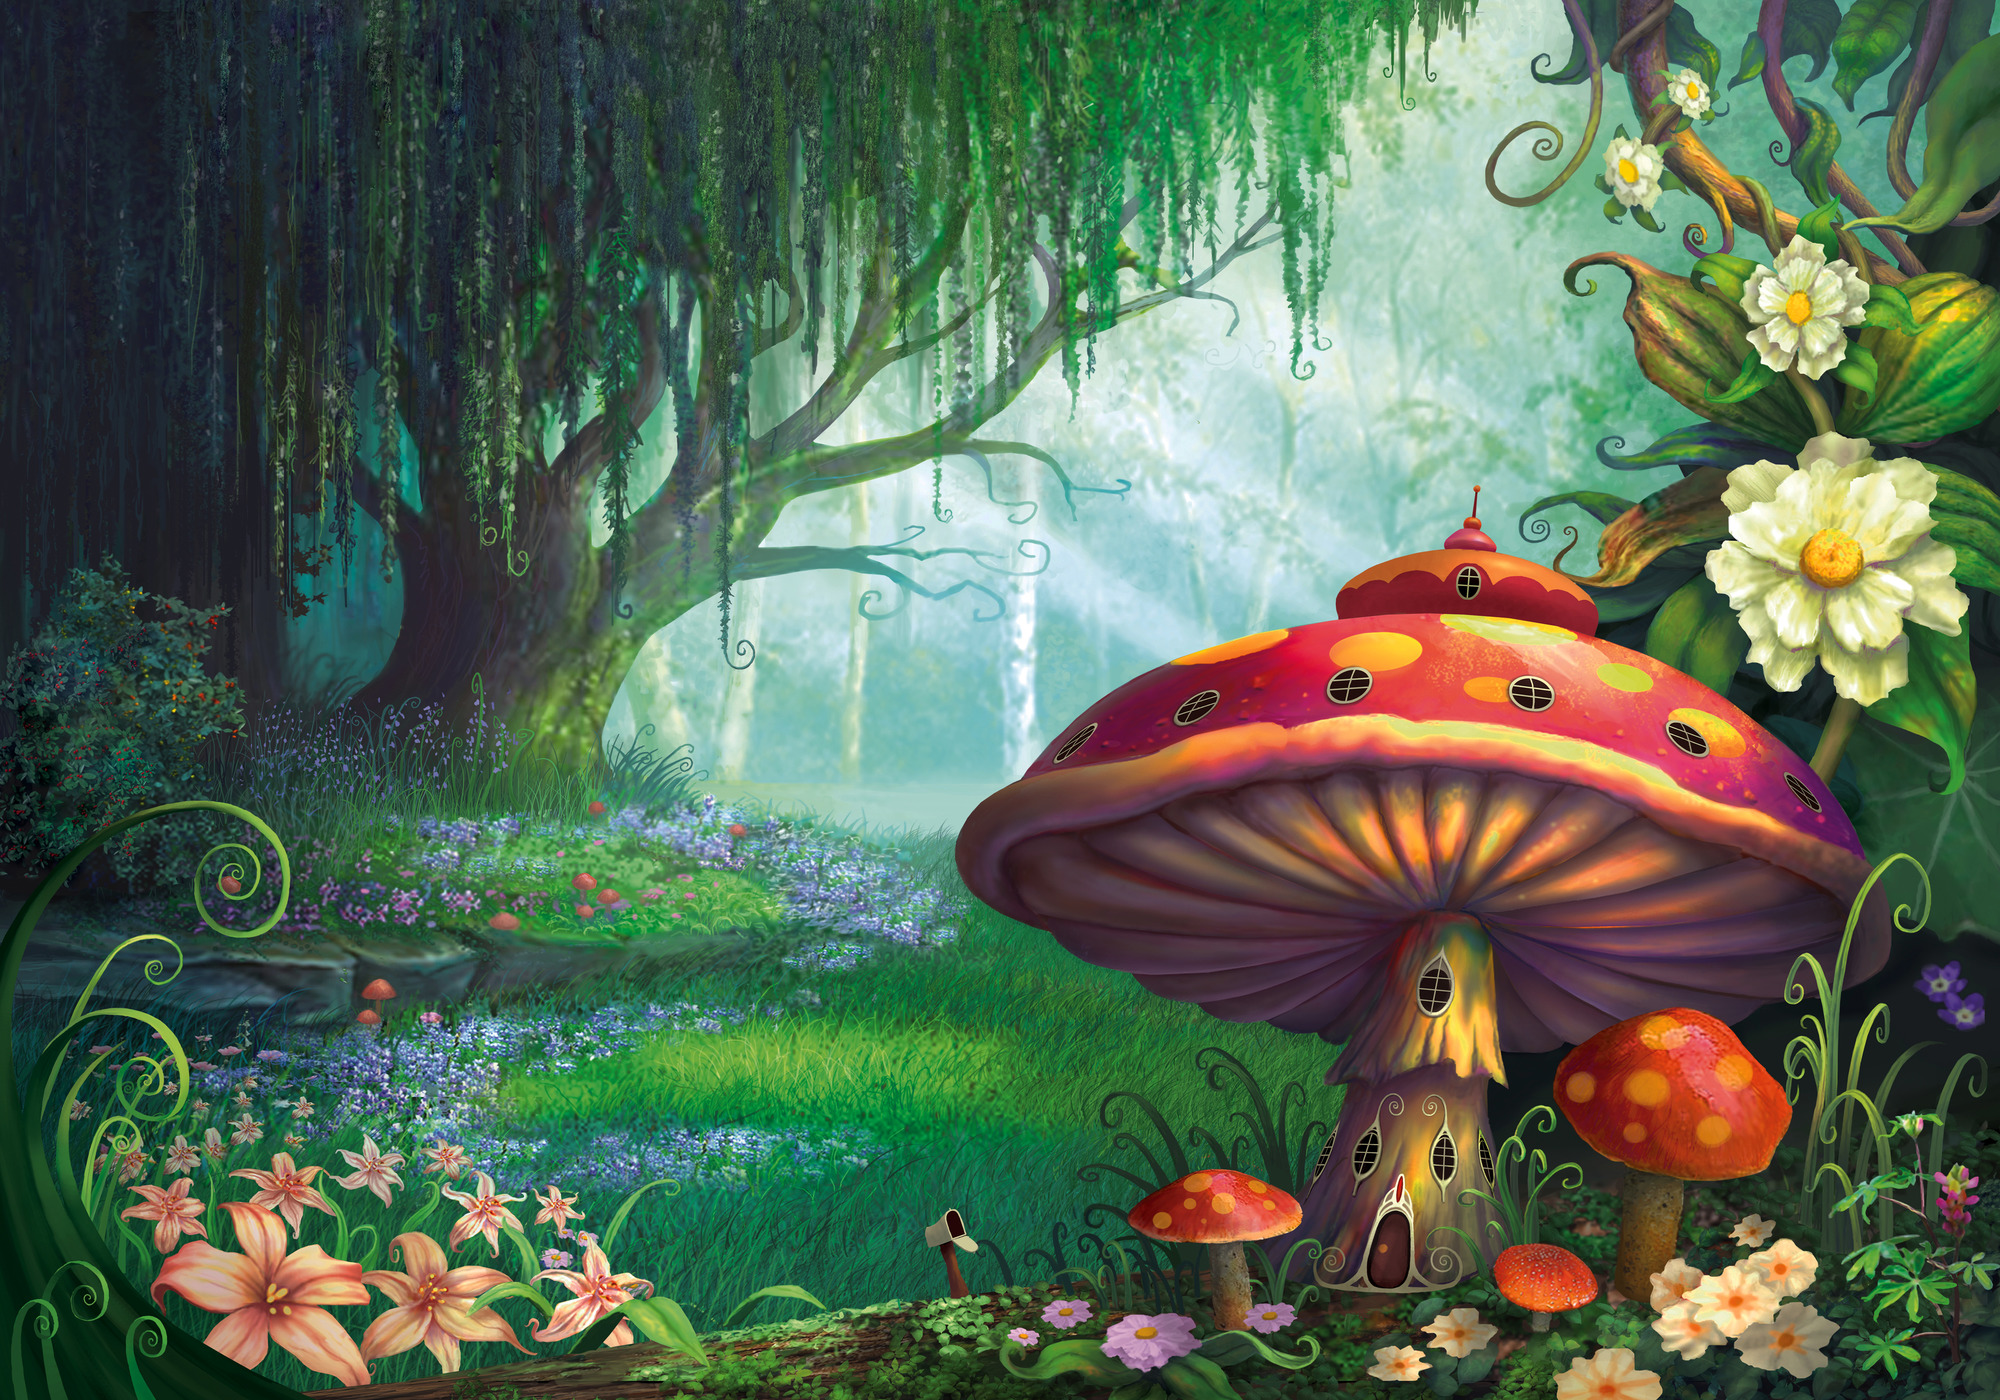 so nice enchanted forest image